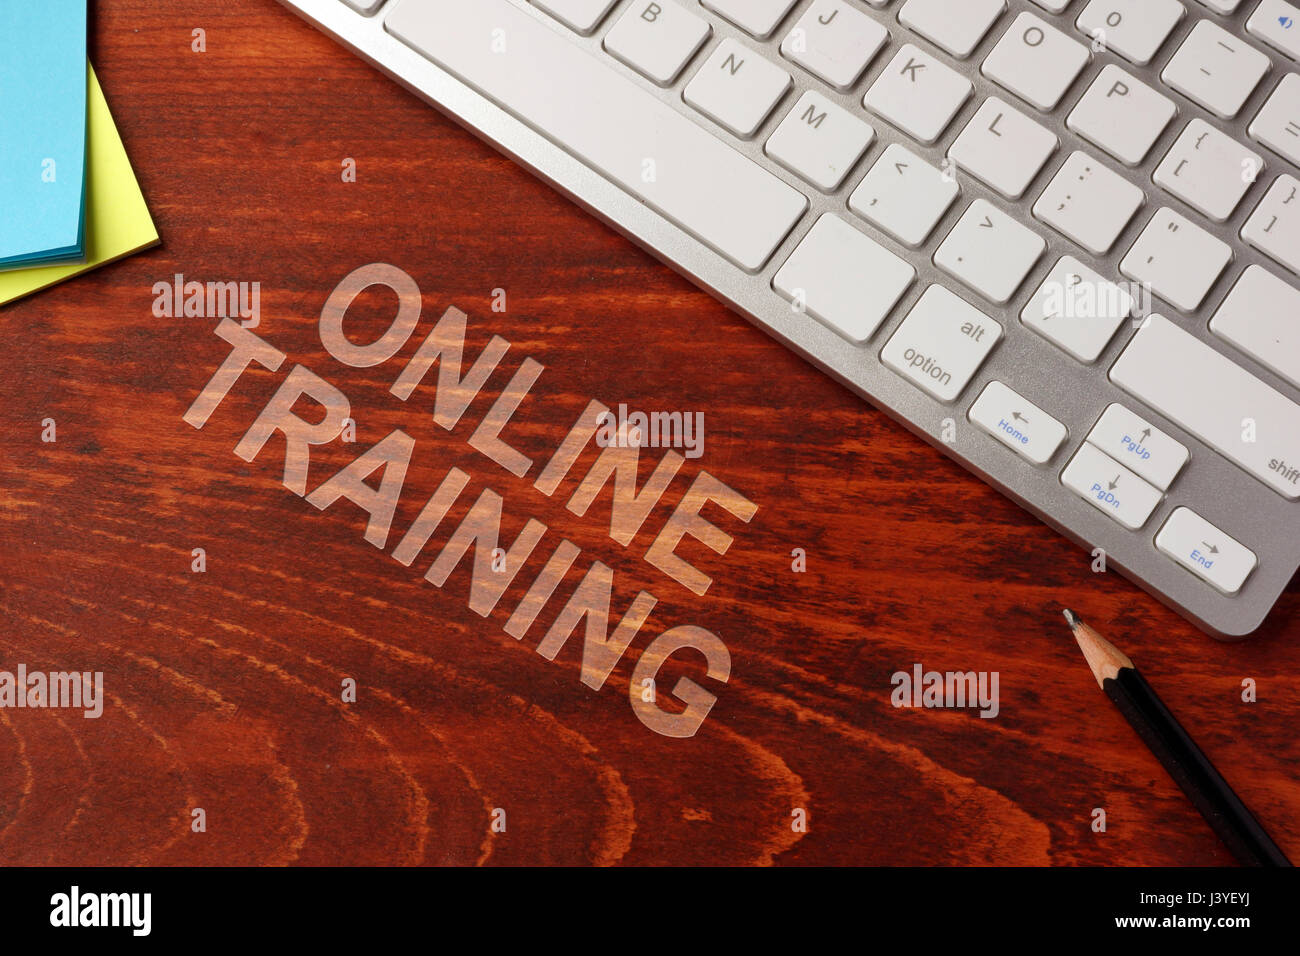 Online training written on a wooden surface. E-learning concept. Stock Photo